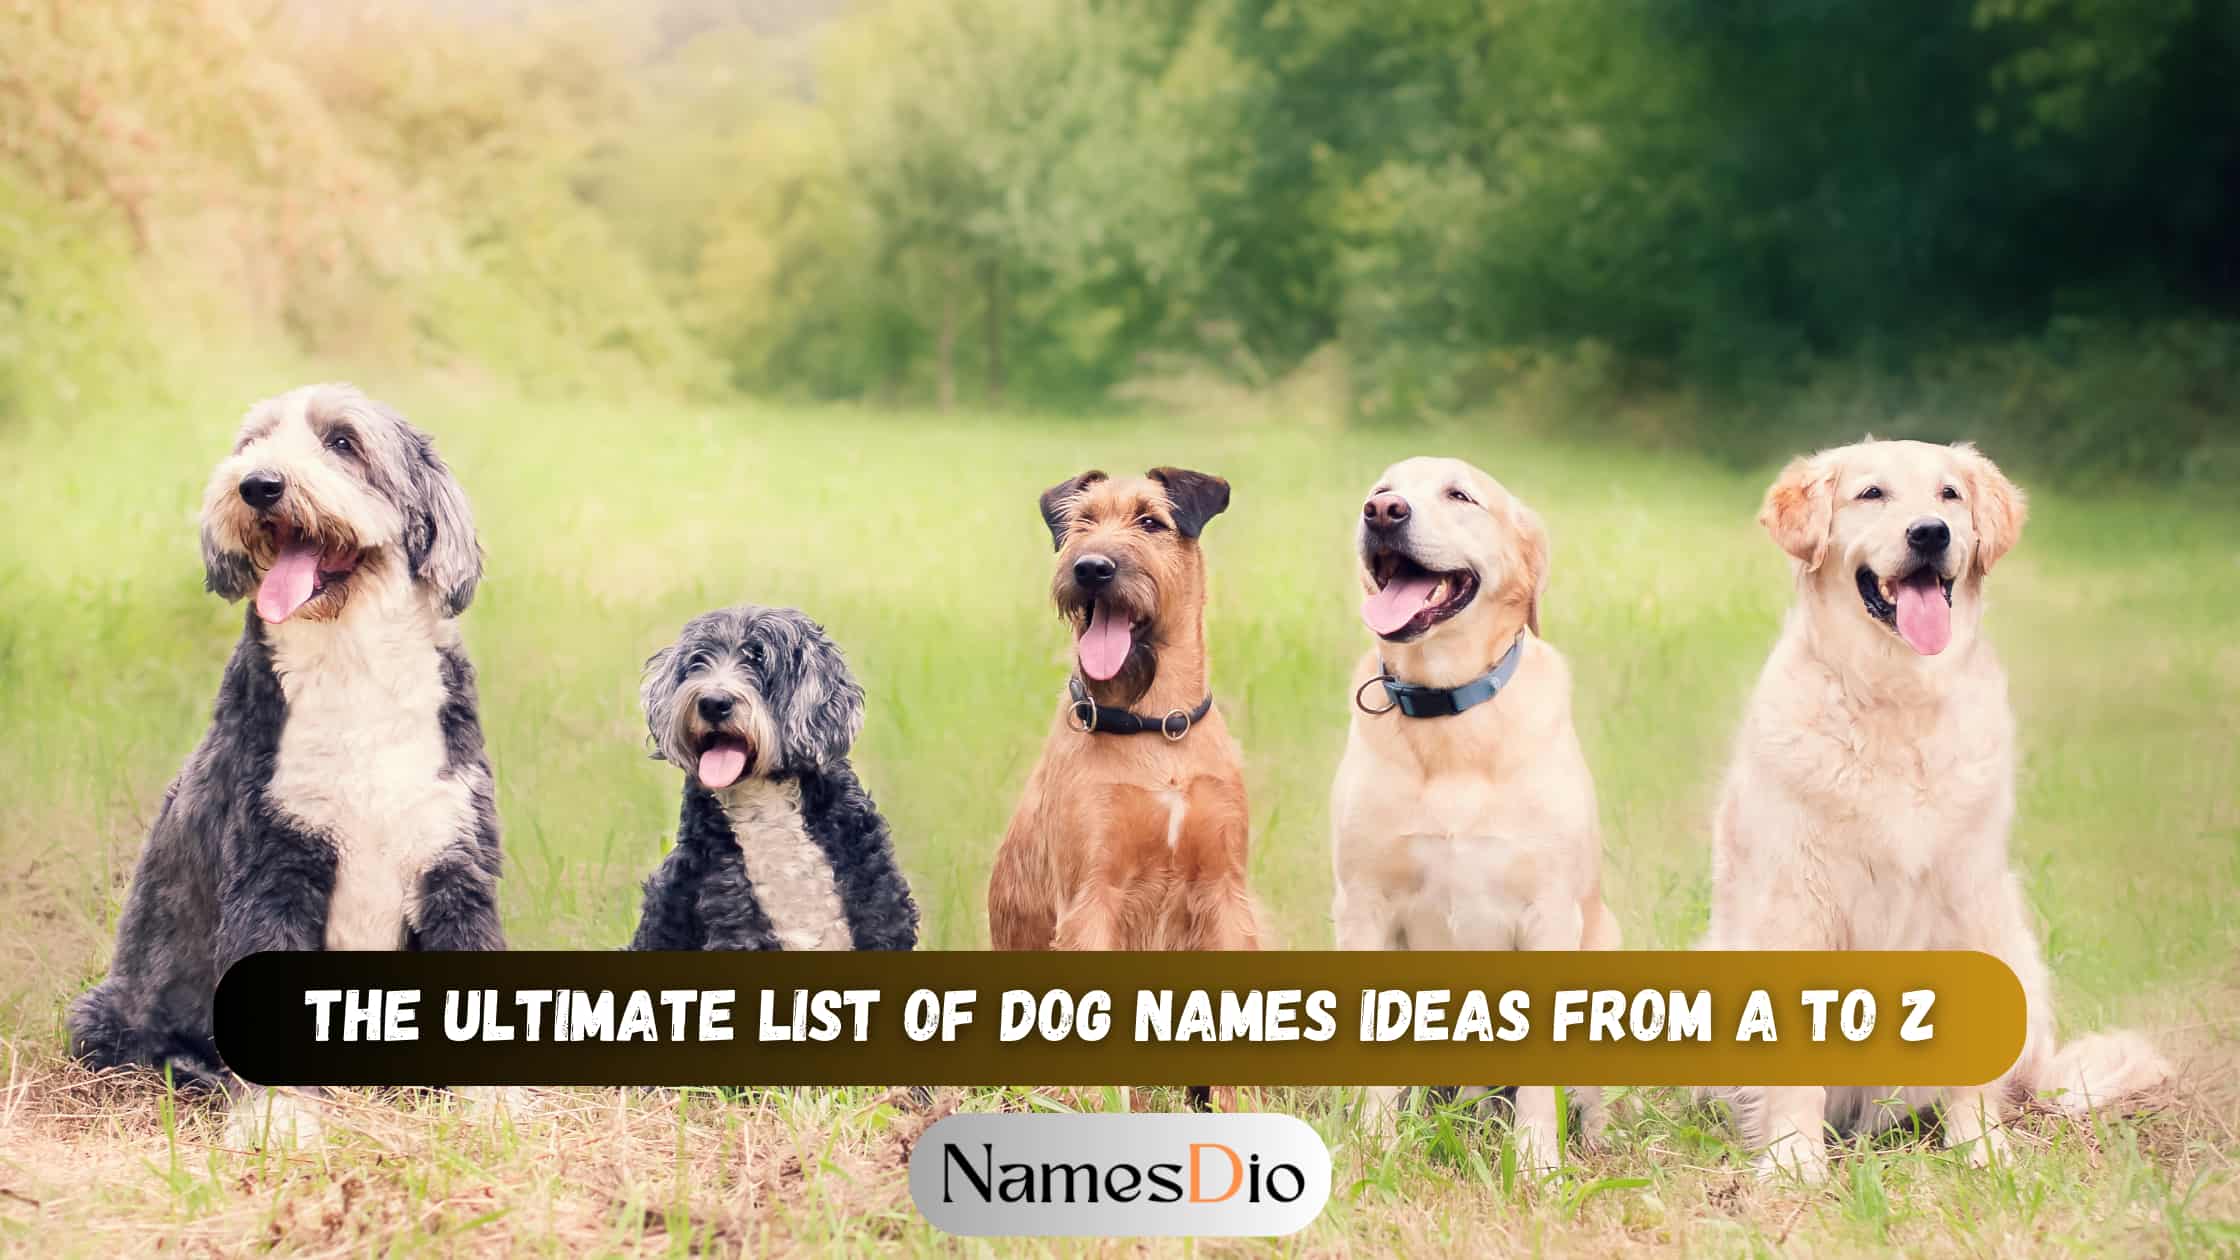 The-Ultimate-List-of-Dog-Names-Ideas-From-A-to-Z